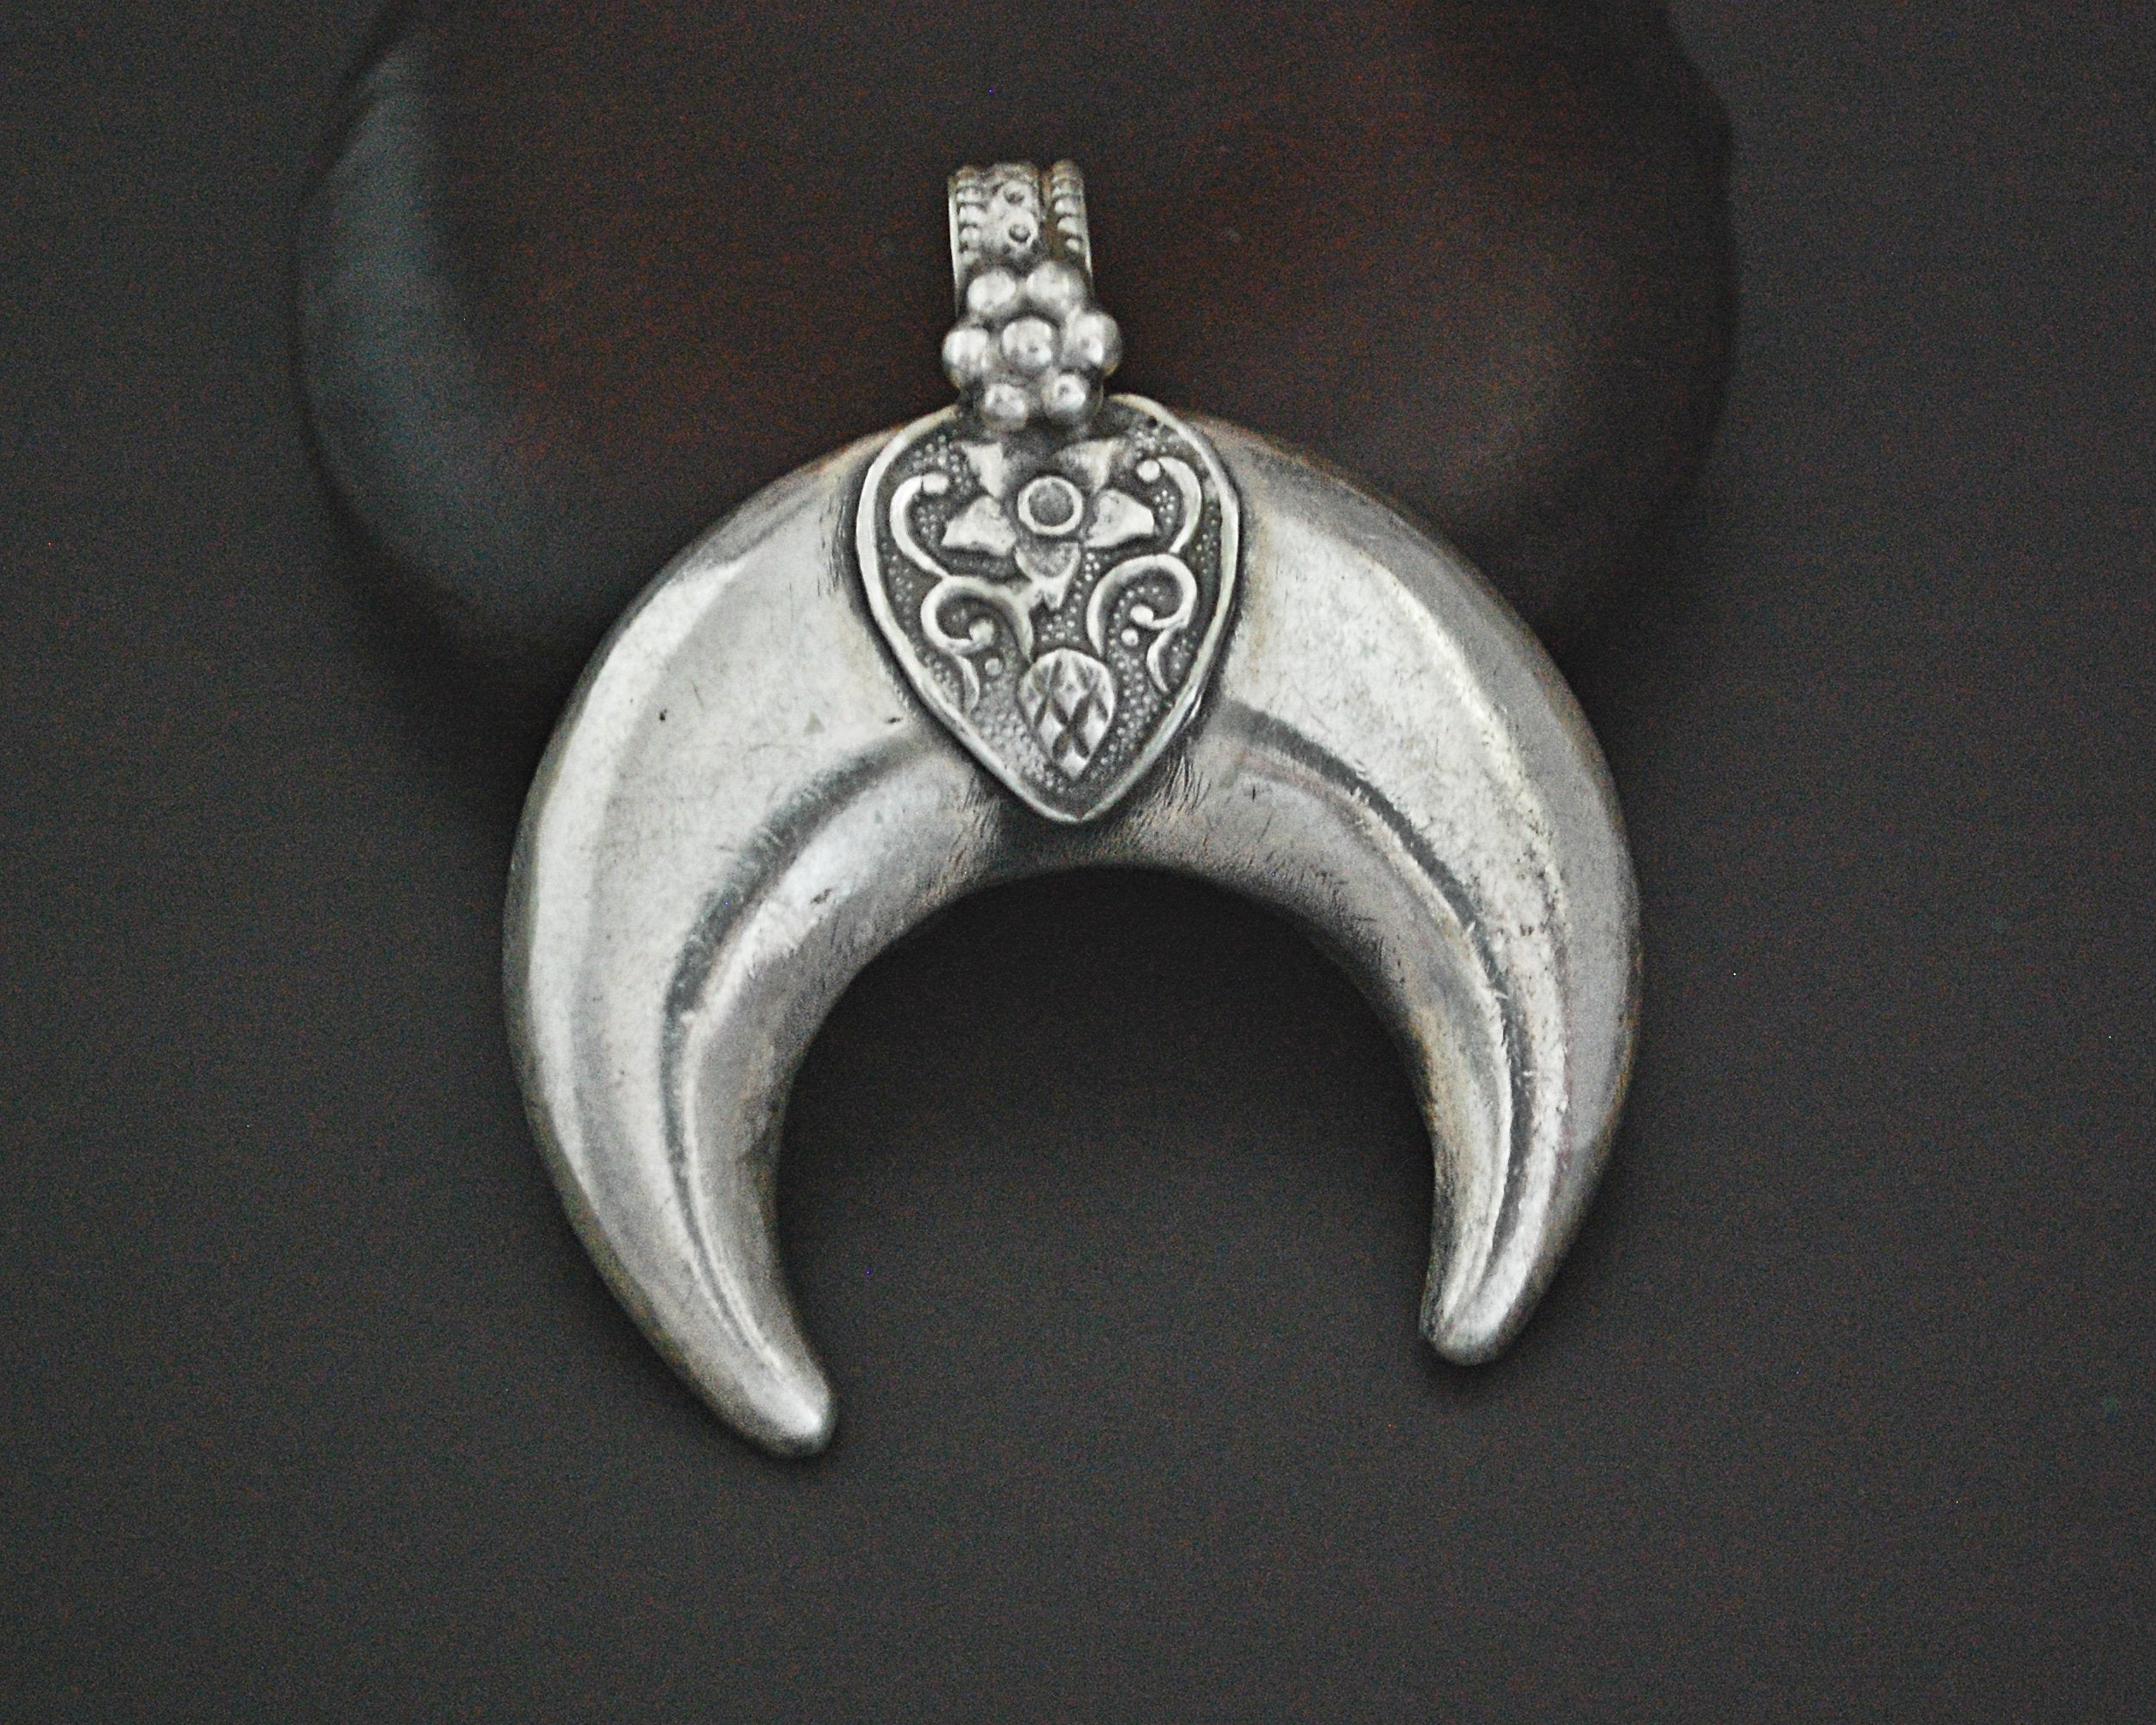 Indian Crescent Moon Pendant with Flower Ornament